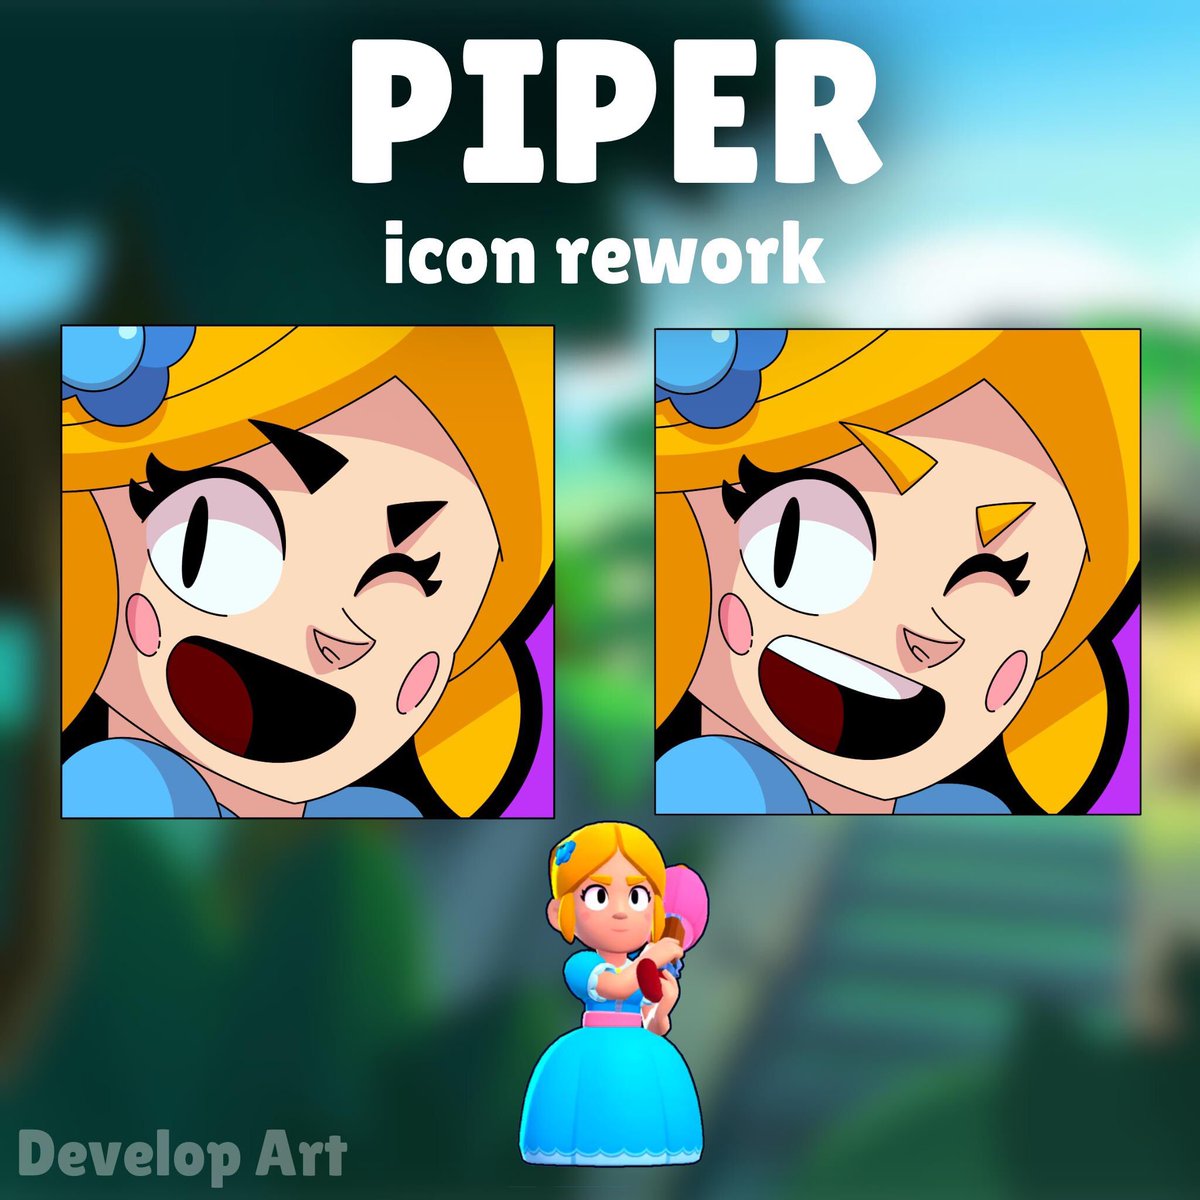 Dev On Twitter I Love Piper Remodel Still I Think This Can Make Icon Look More Polished